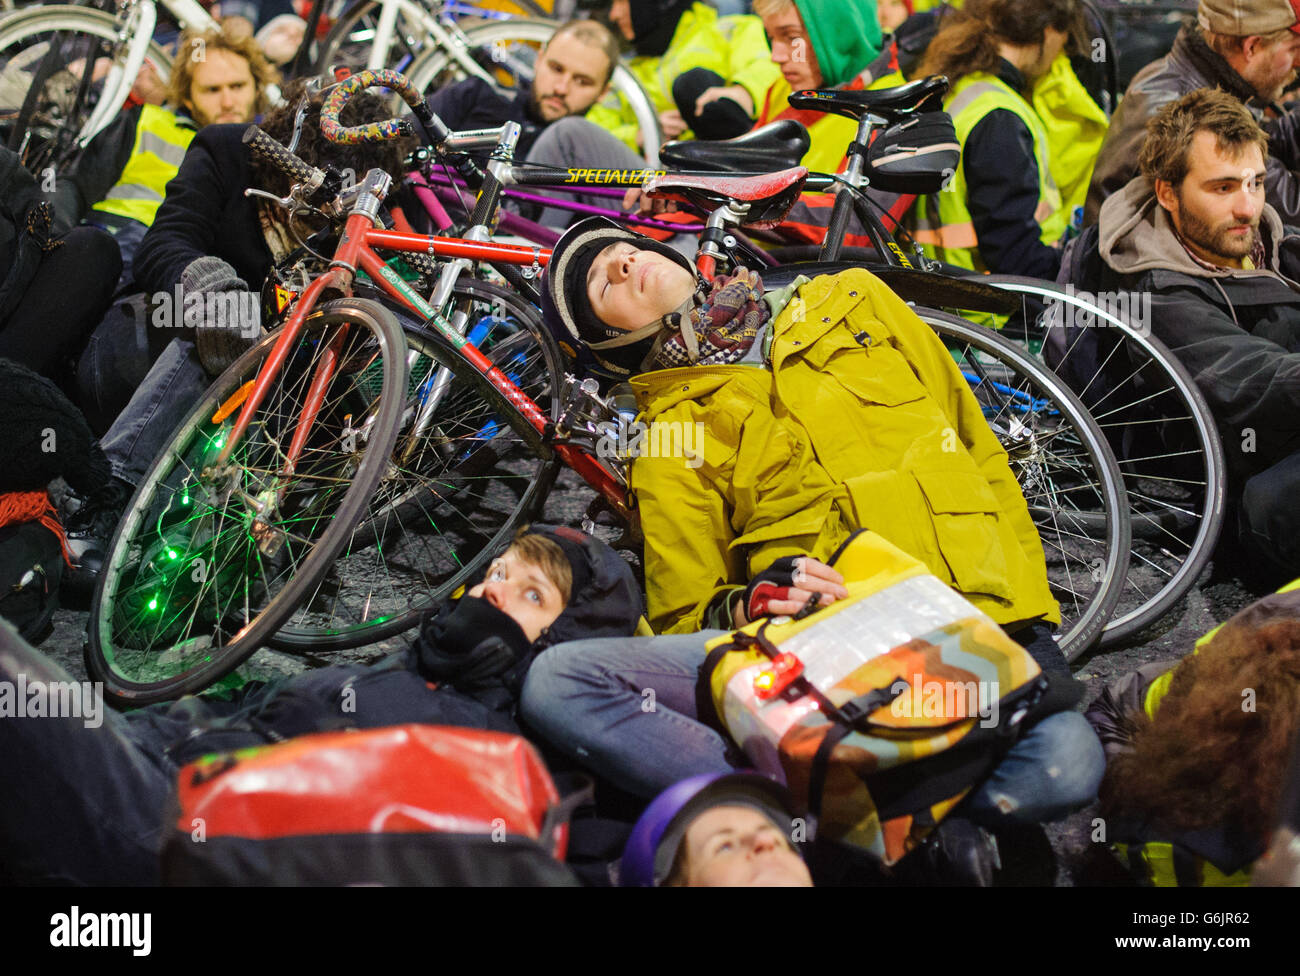 Cyclists take part in a 'die-in' protest outside the headquarters of Transport for London, in Blackfriars, London, calling for action to improve road safety for cyclists. Stock Photo